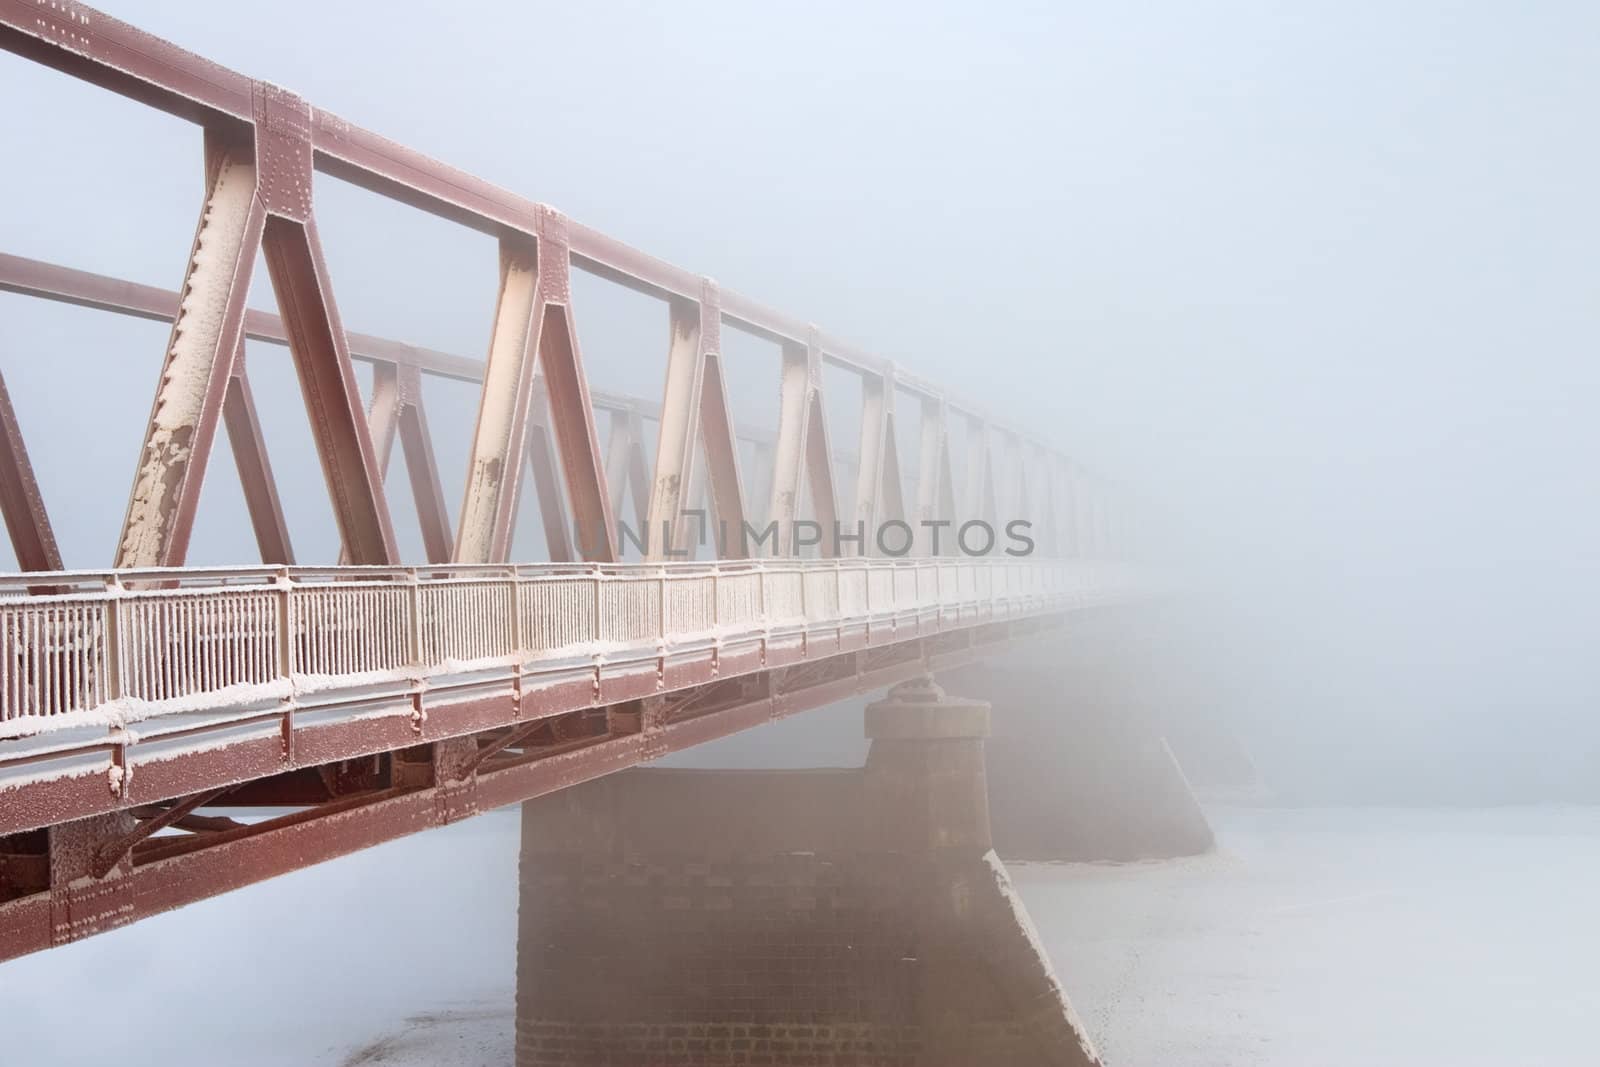 Kind on the bridge through the river in foggy morning